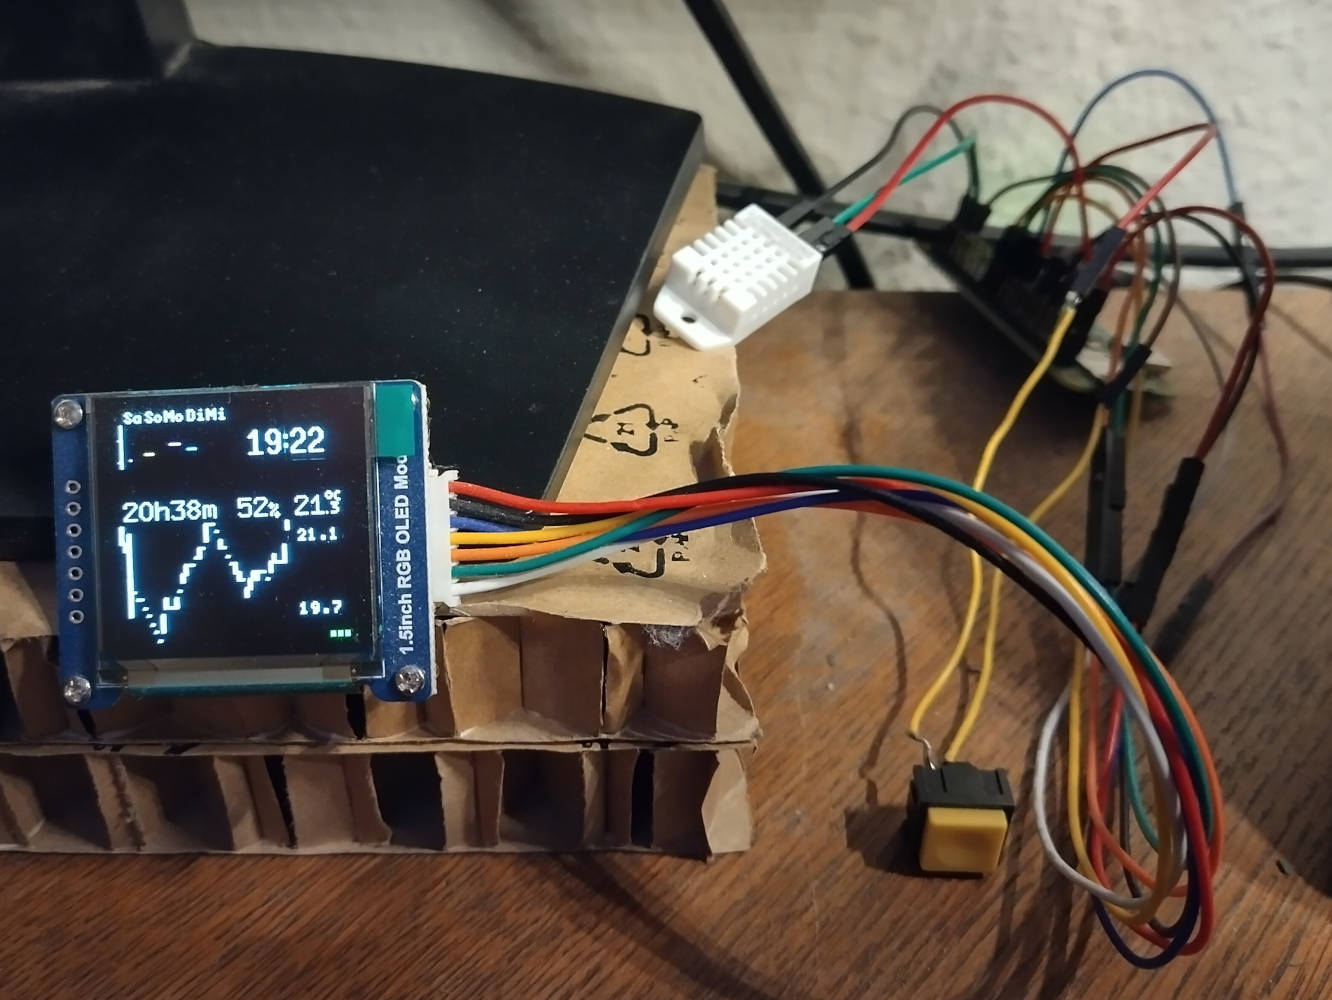 OLED display showing temperature and upcoming appointments, connected to a Raspberry Pi